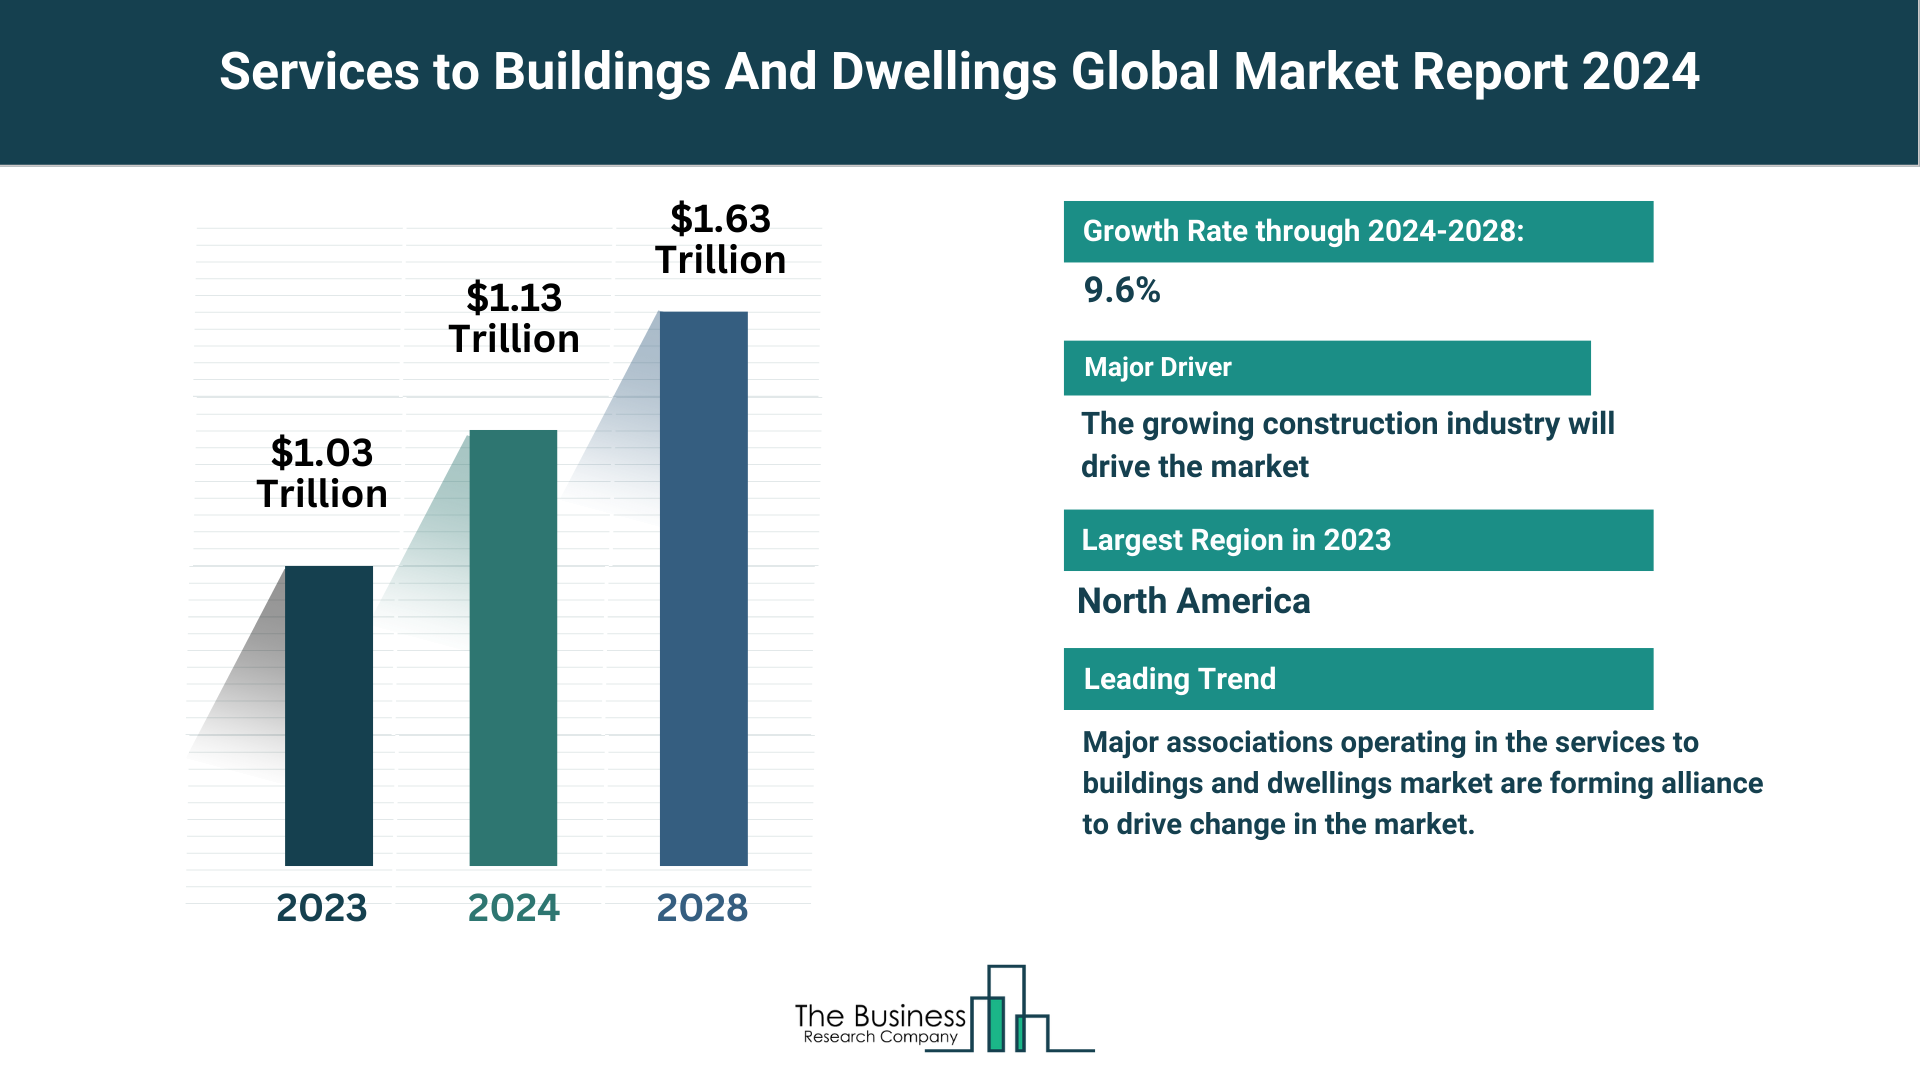 How Is the Services to Buildings And Dwellings Market Expected To Grow Through 2024-2033?